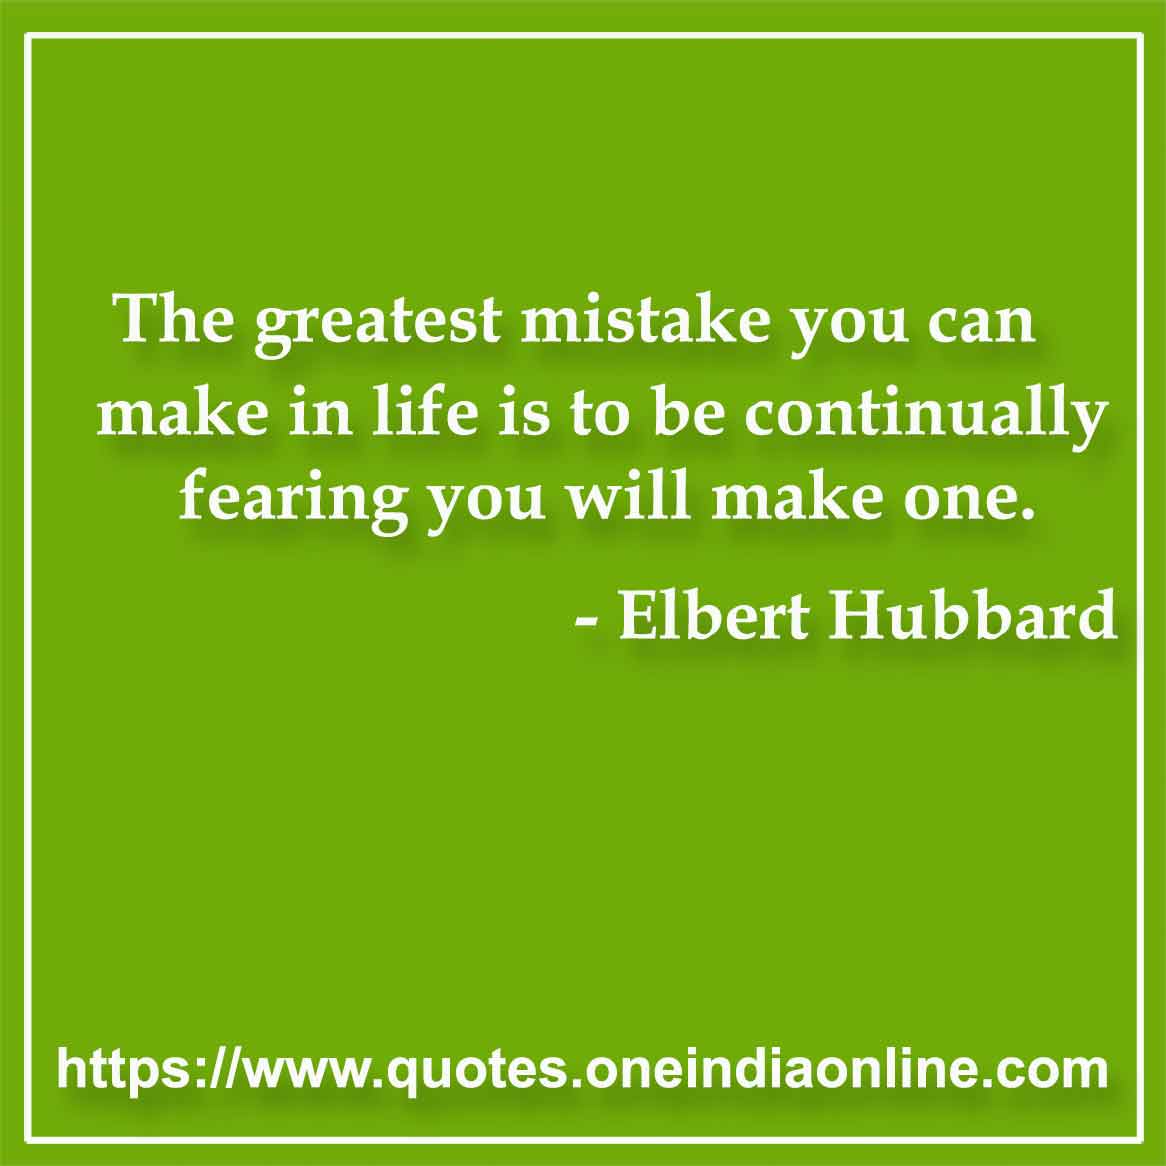 The greatest mistake you can make in life is to be continually fearing you will make one.

- Mistake Quote by Elbert Hubbard 